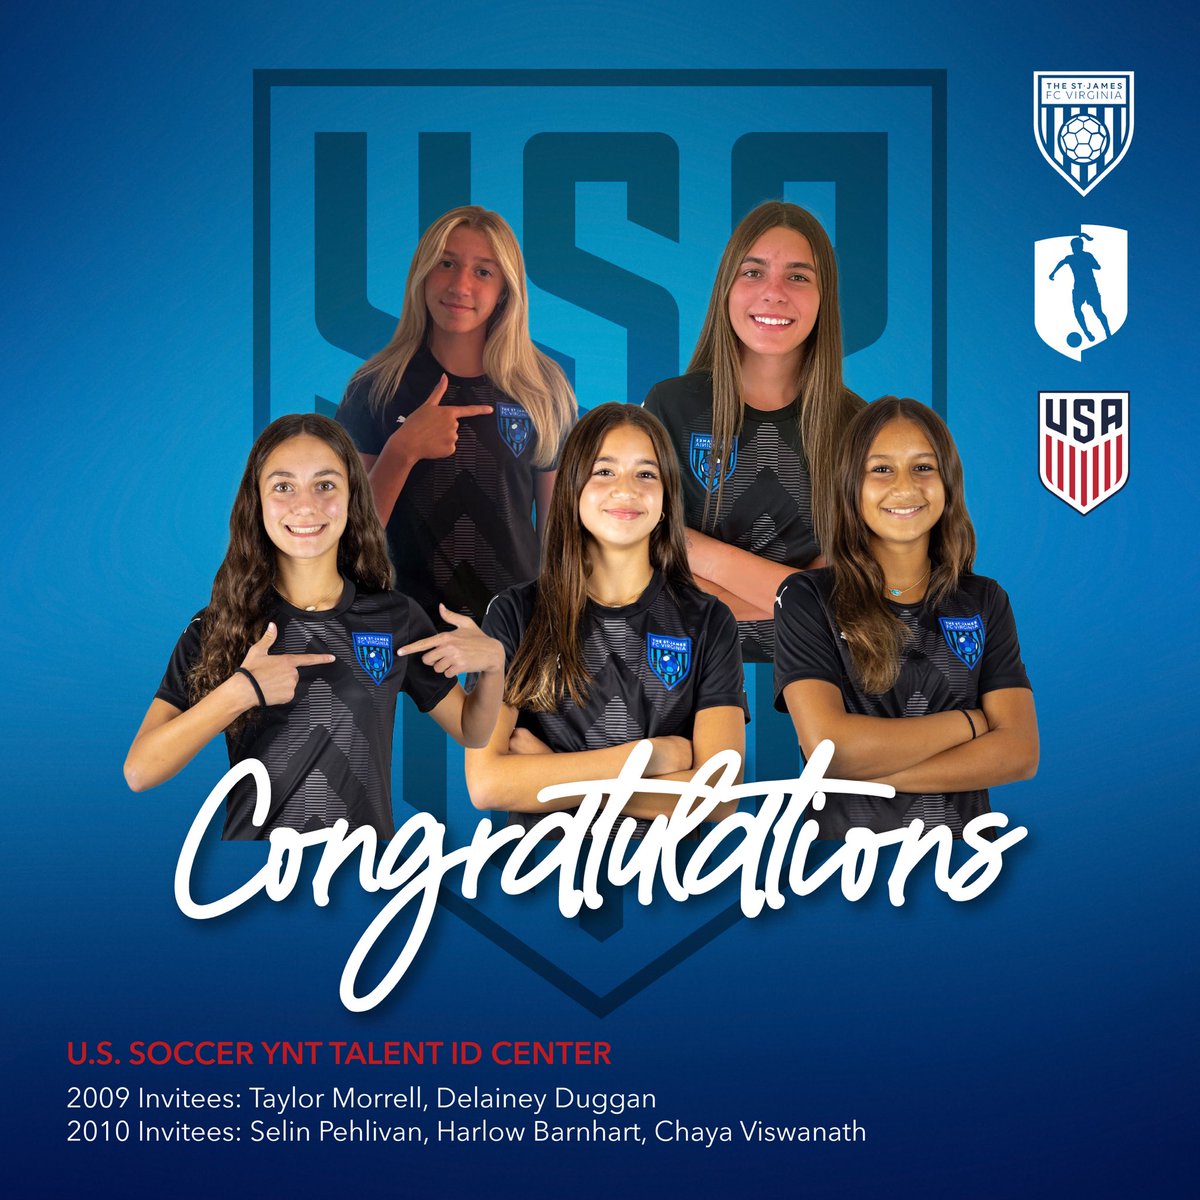 🤩 #FCV is proud to announce 5 of our @GAcademyLeague players have been invited to the next 🇺🇸 U.S. Soccer YNT Talent ID Center. 👏 Congrats, ladies!